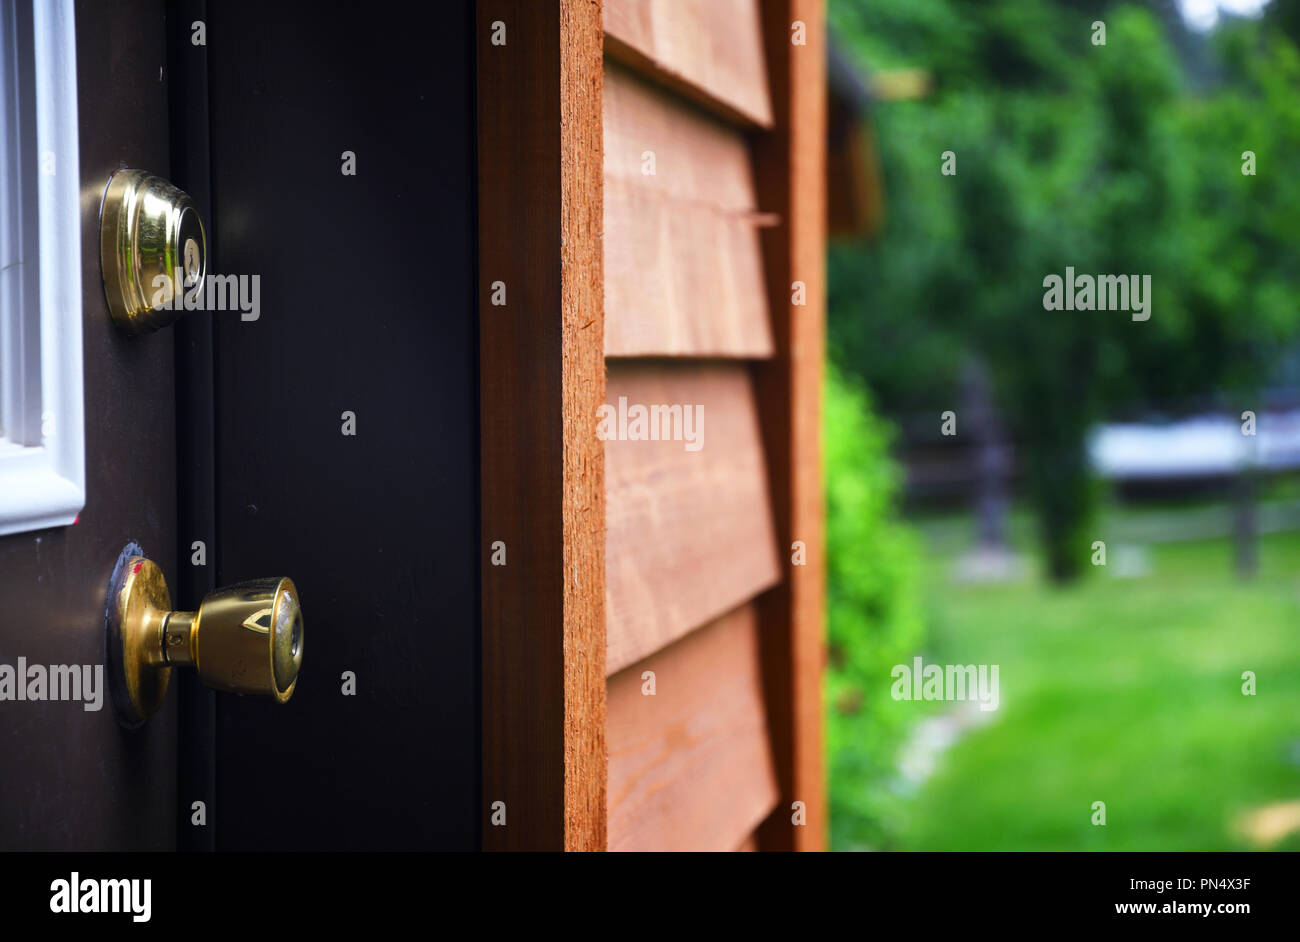 Close up of a door knob and dead bolt with cedar house siding and a lawn in the background Stock Photo